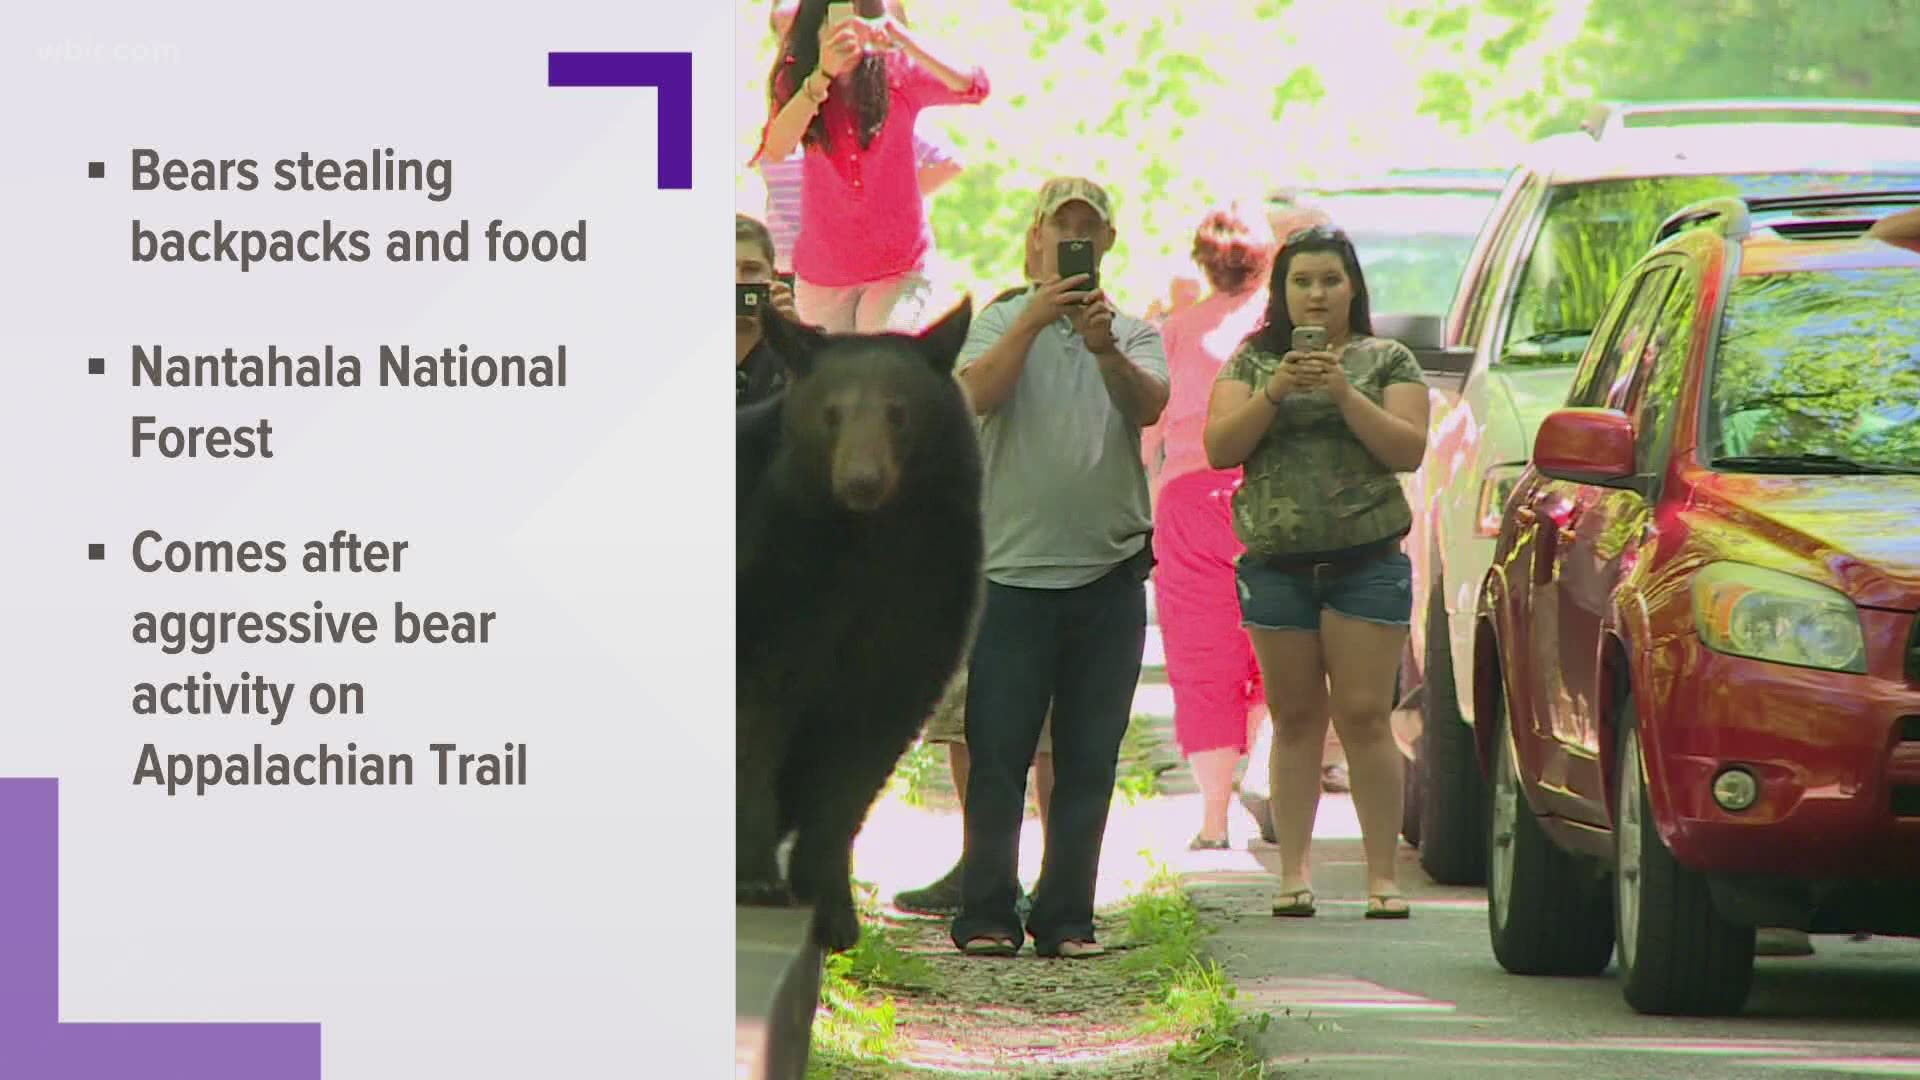 Wildlife experts say they are seeing a rise in bear activity just across the state line in North Carolina.